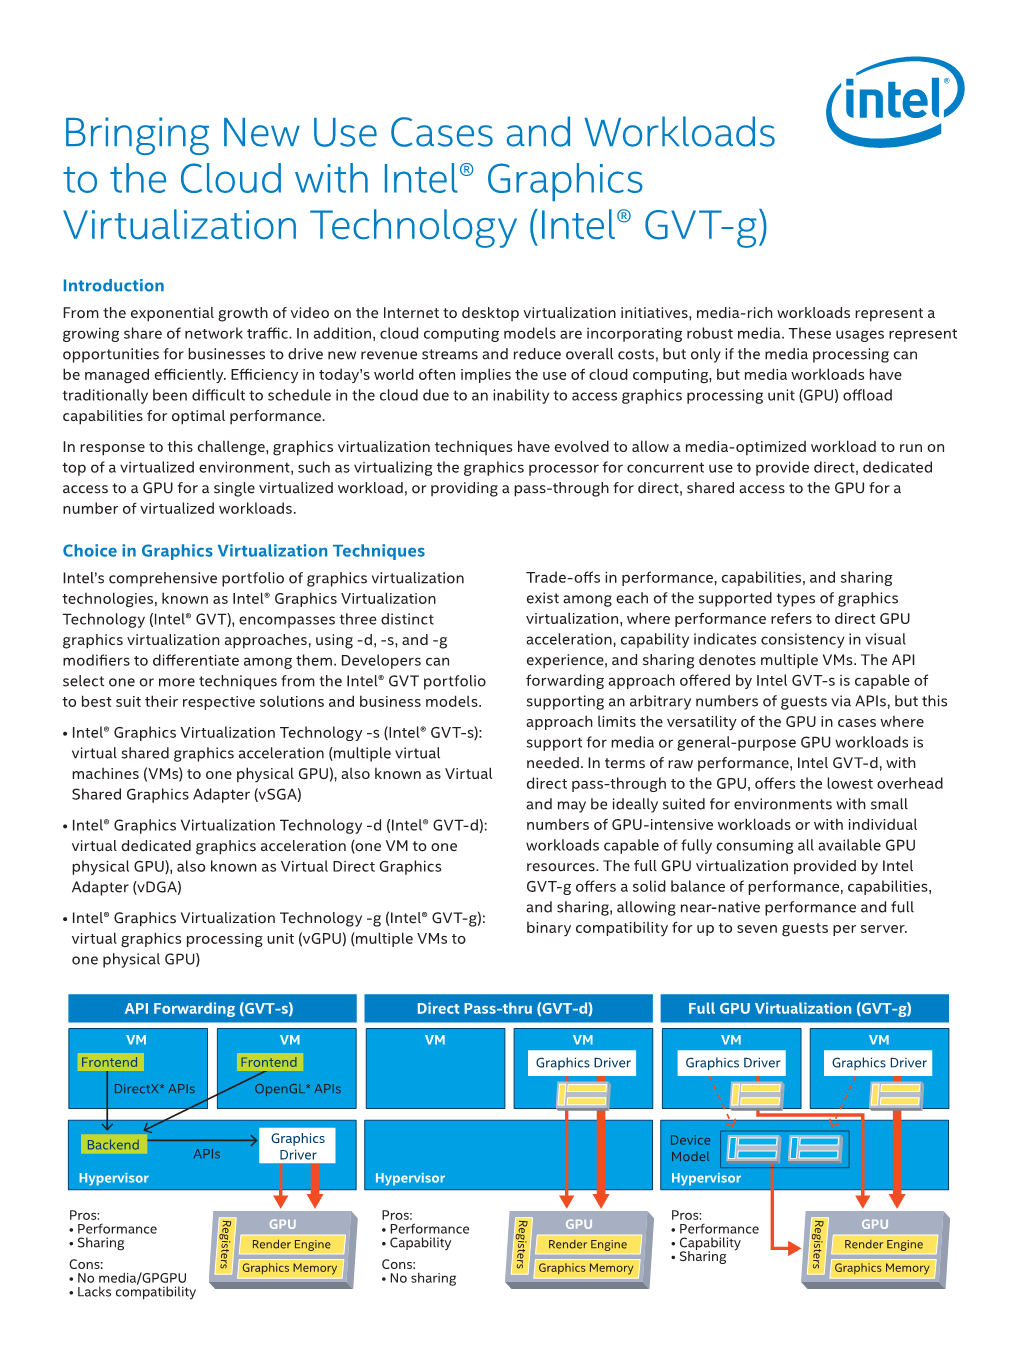 Bringing New Use Cases and Workloads to the Cloud with Intel® Graphics Virtualization Technology (Intel® GVT-G)